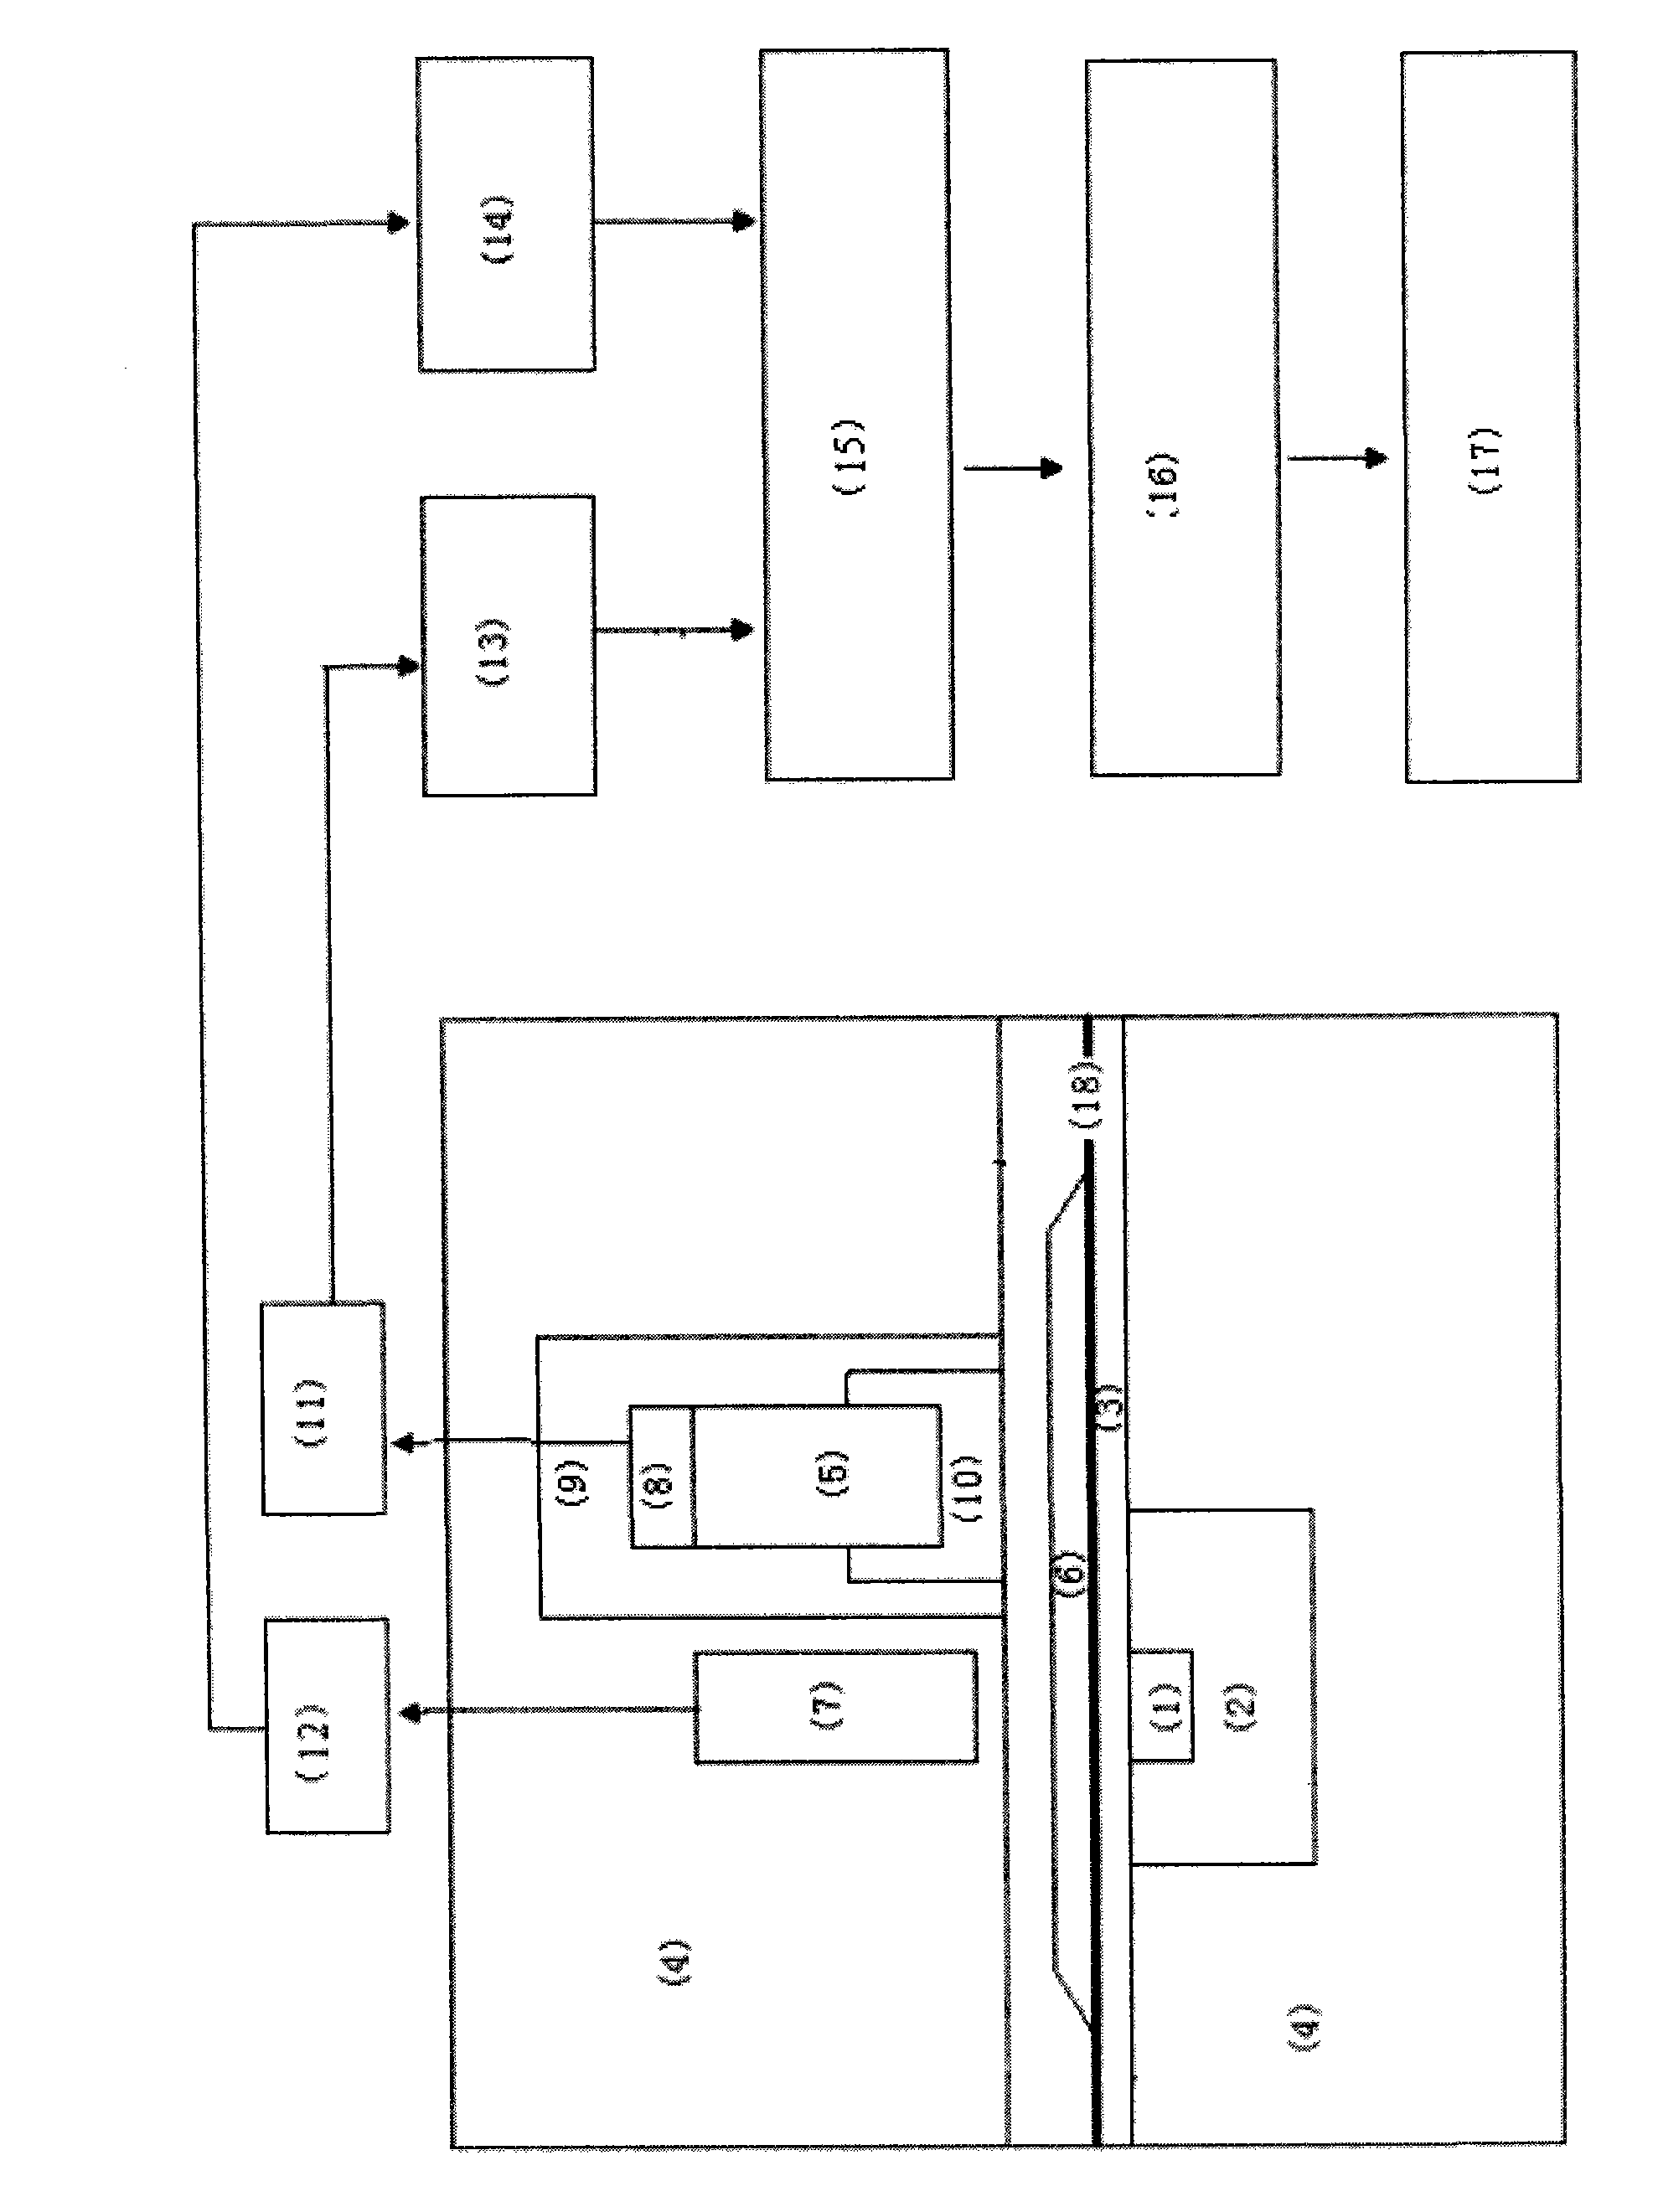 Transmission-type online detection device for coal characteristic indexes